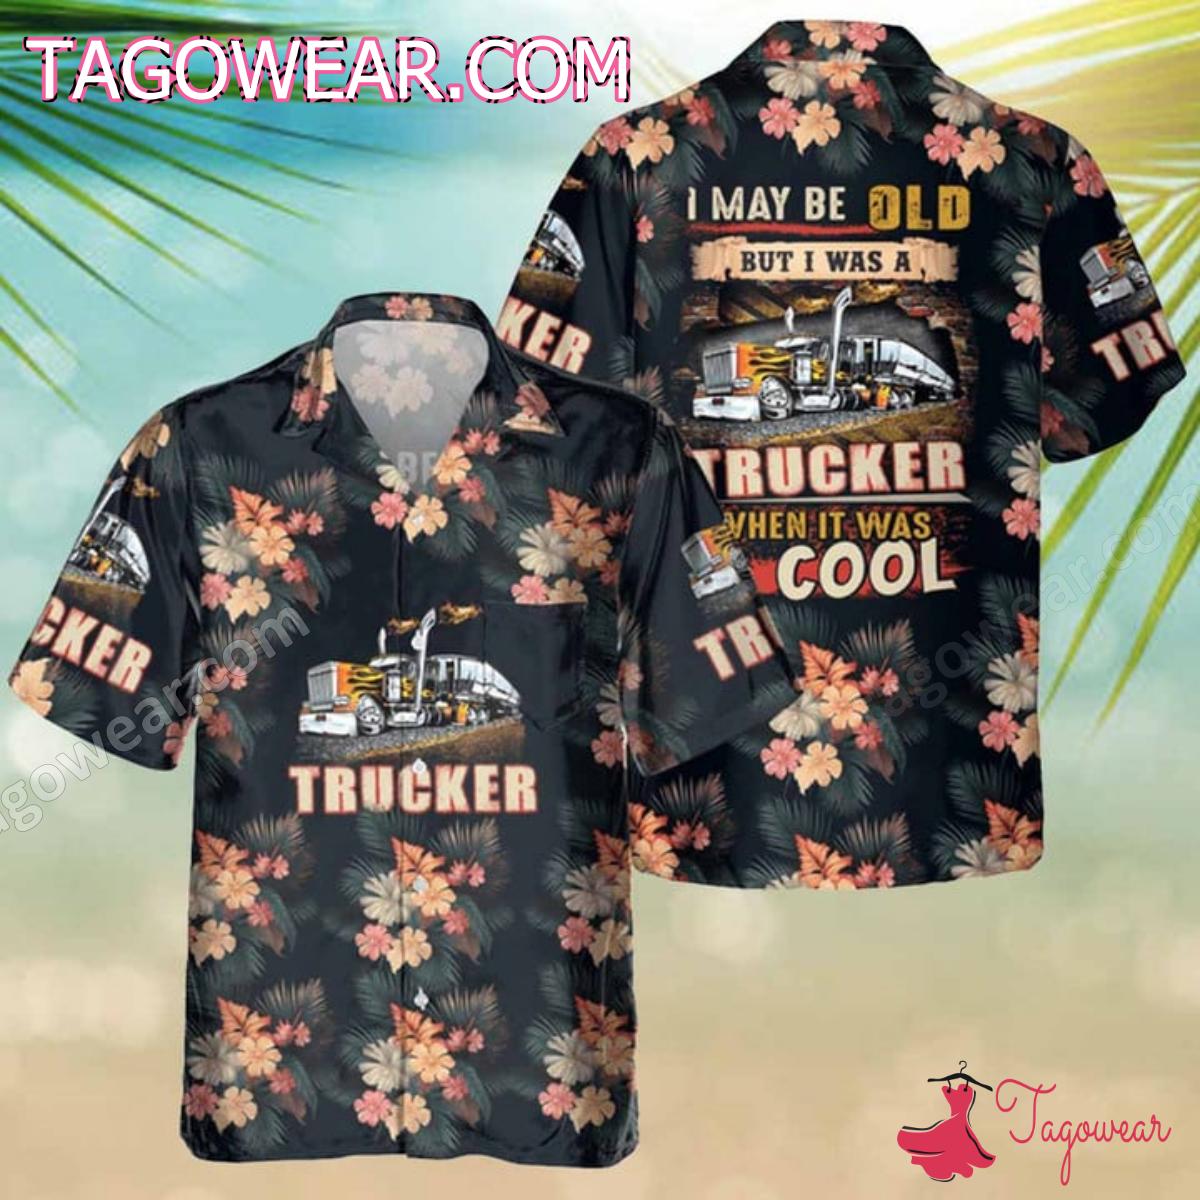 I May Be Old But I Was A Trucker When It Was Cool Hawaiian Shirt